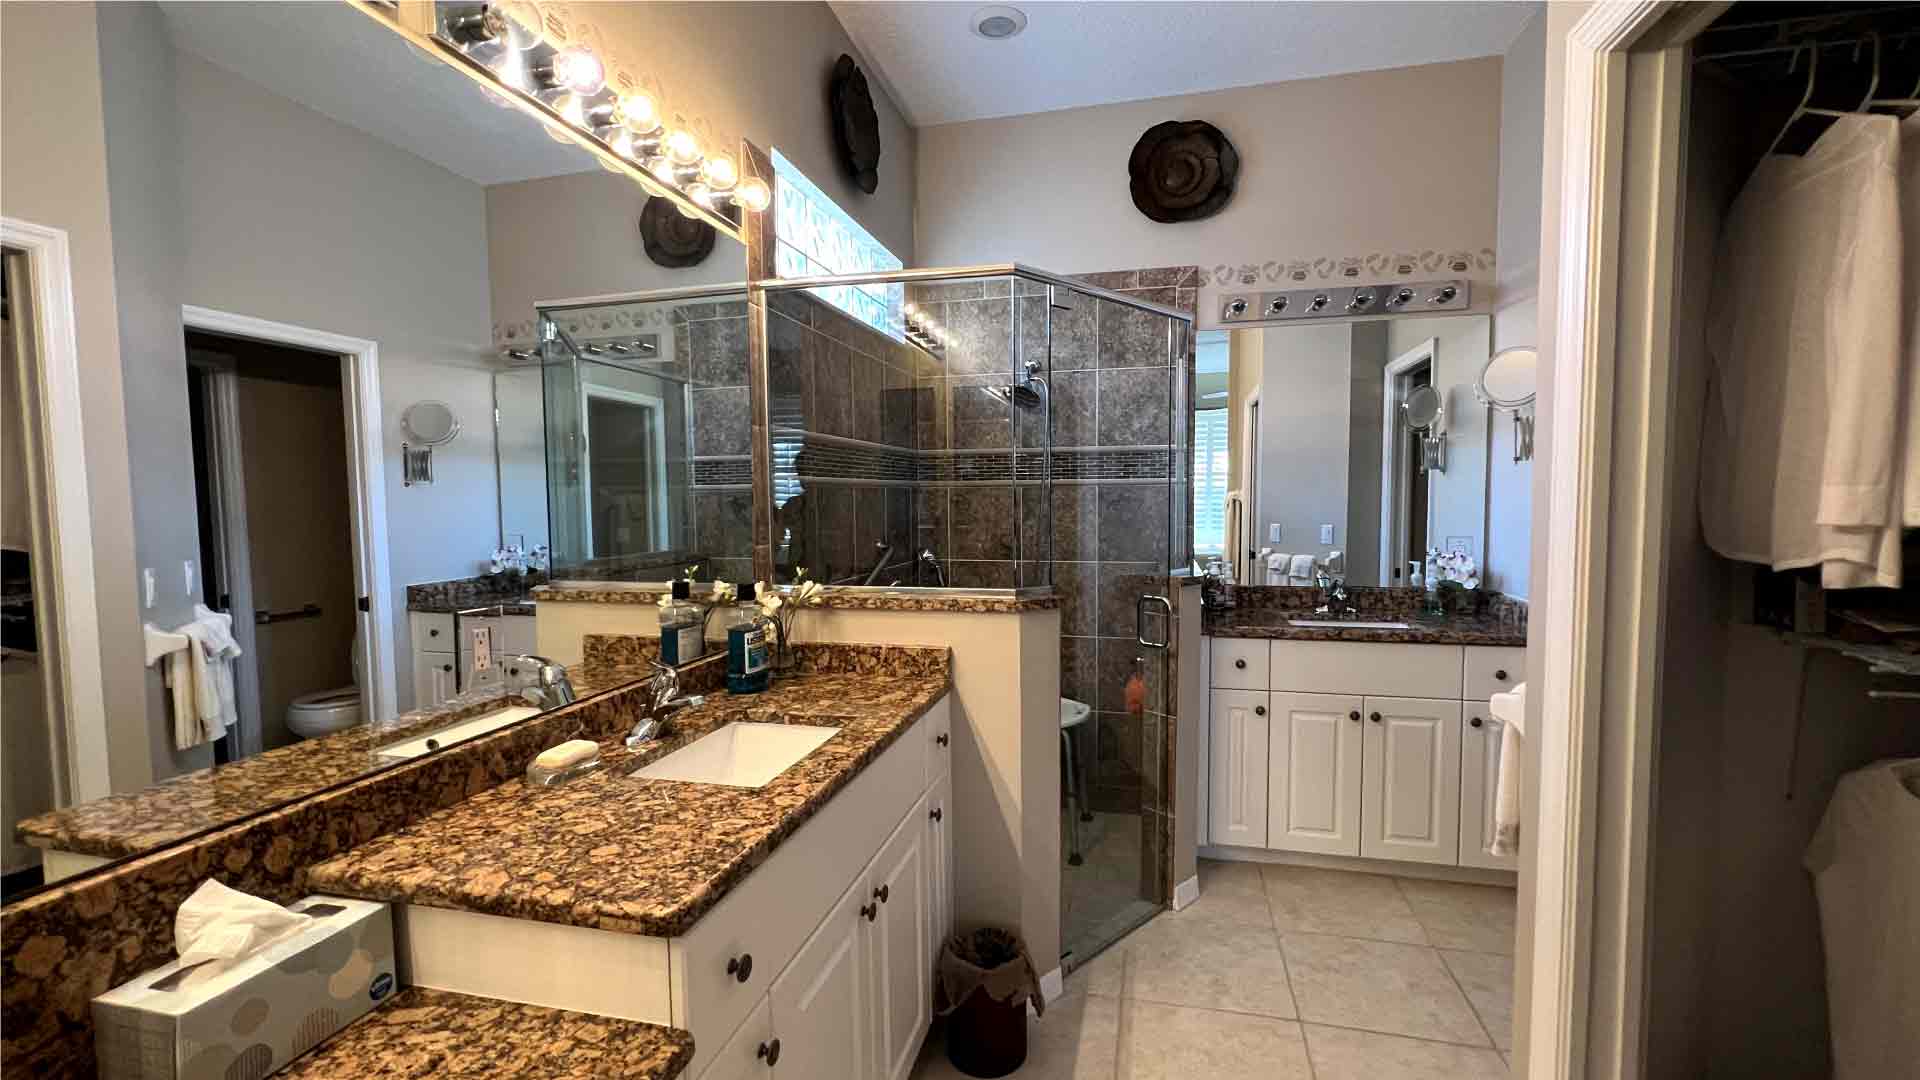 Bathroom cleaning - Regular cleaning in Cape Coral by Goldmillio - Feb 7